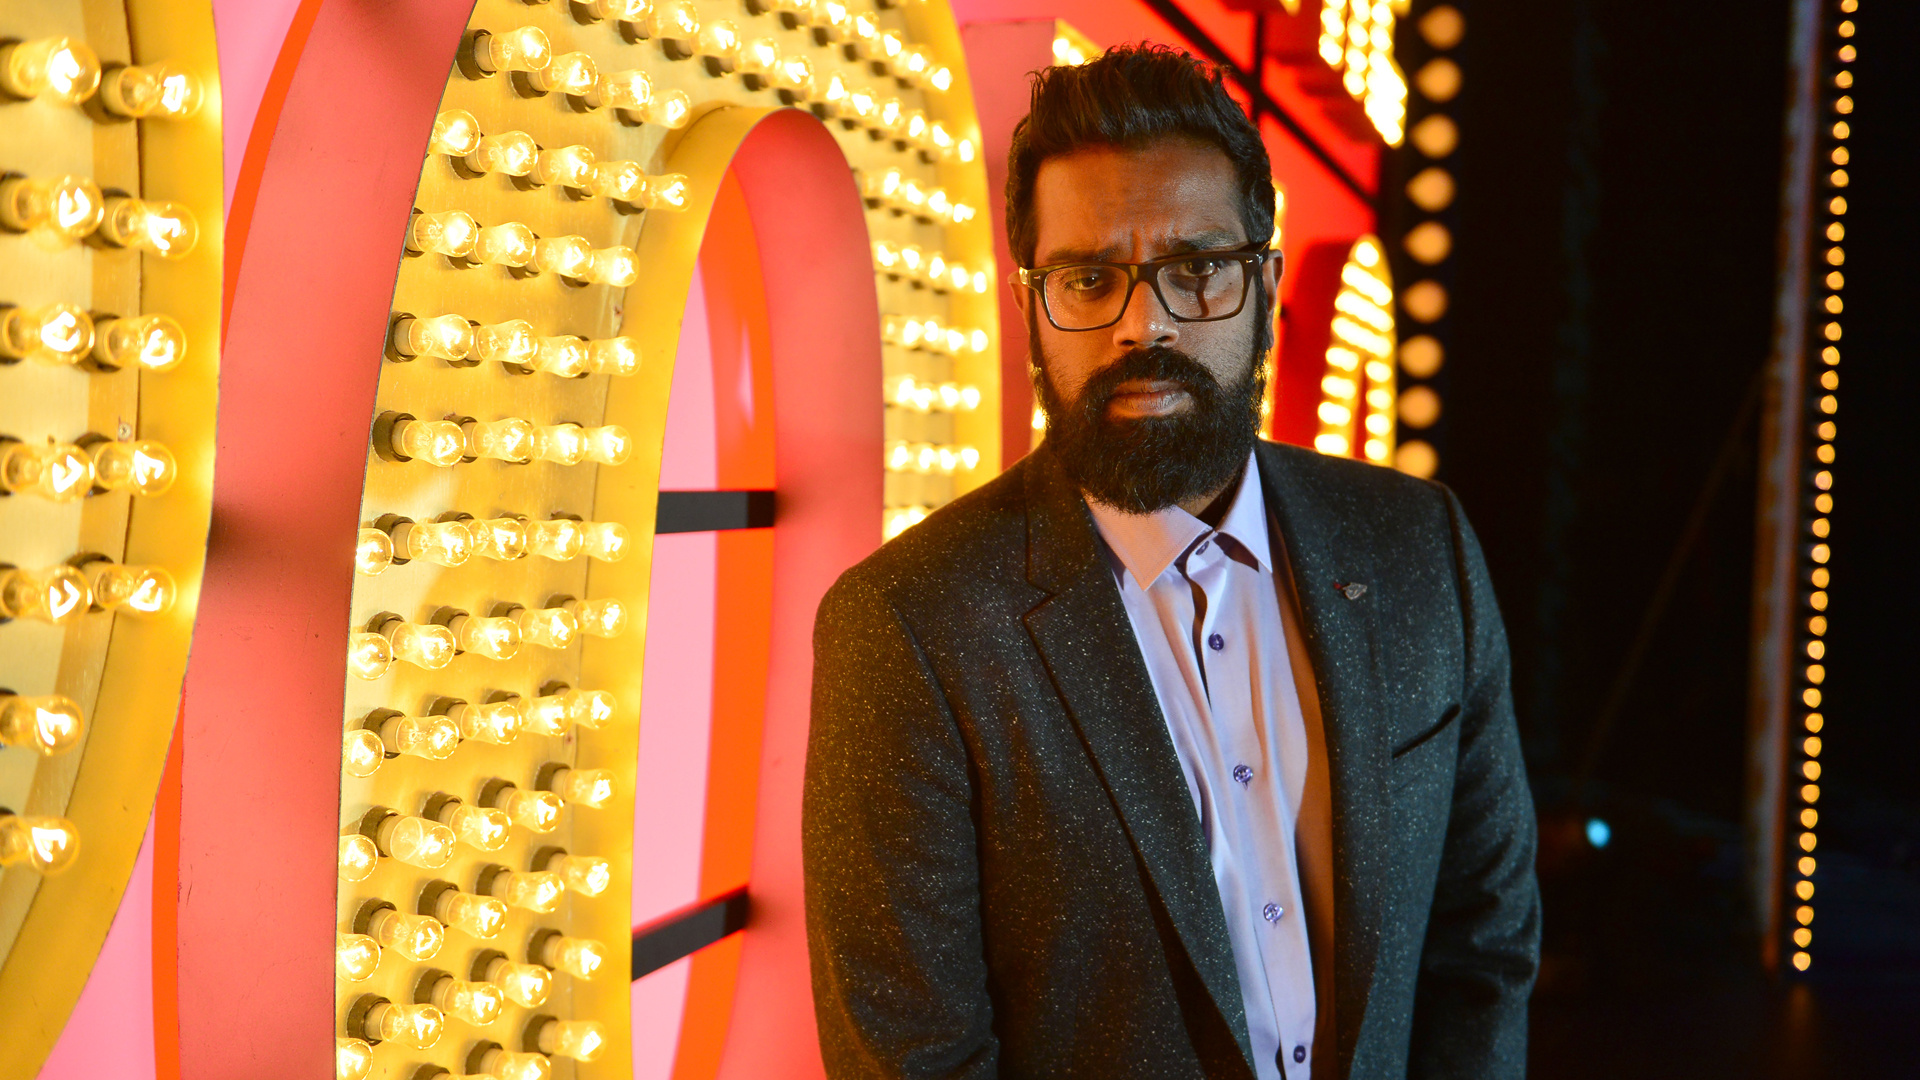 Romesh Ranganathan: The Weakest Link host, A British television quiz show, mainly broadcast on BBC Two. 1920x1080 Full HD Wallpaper.